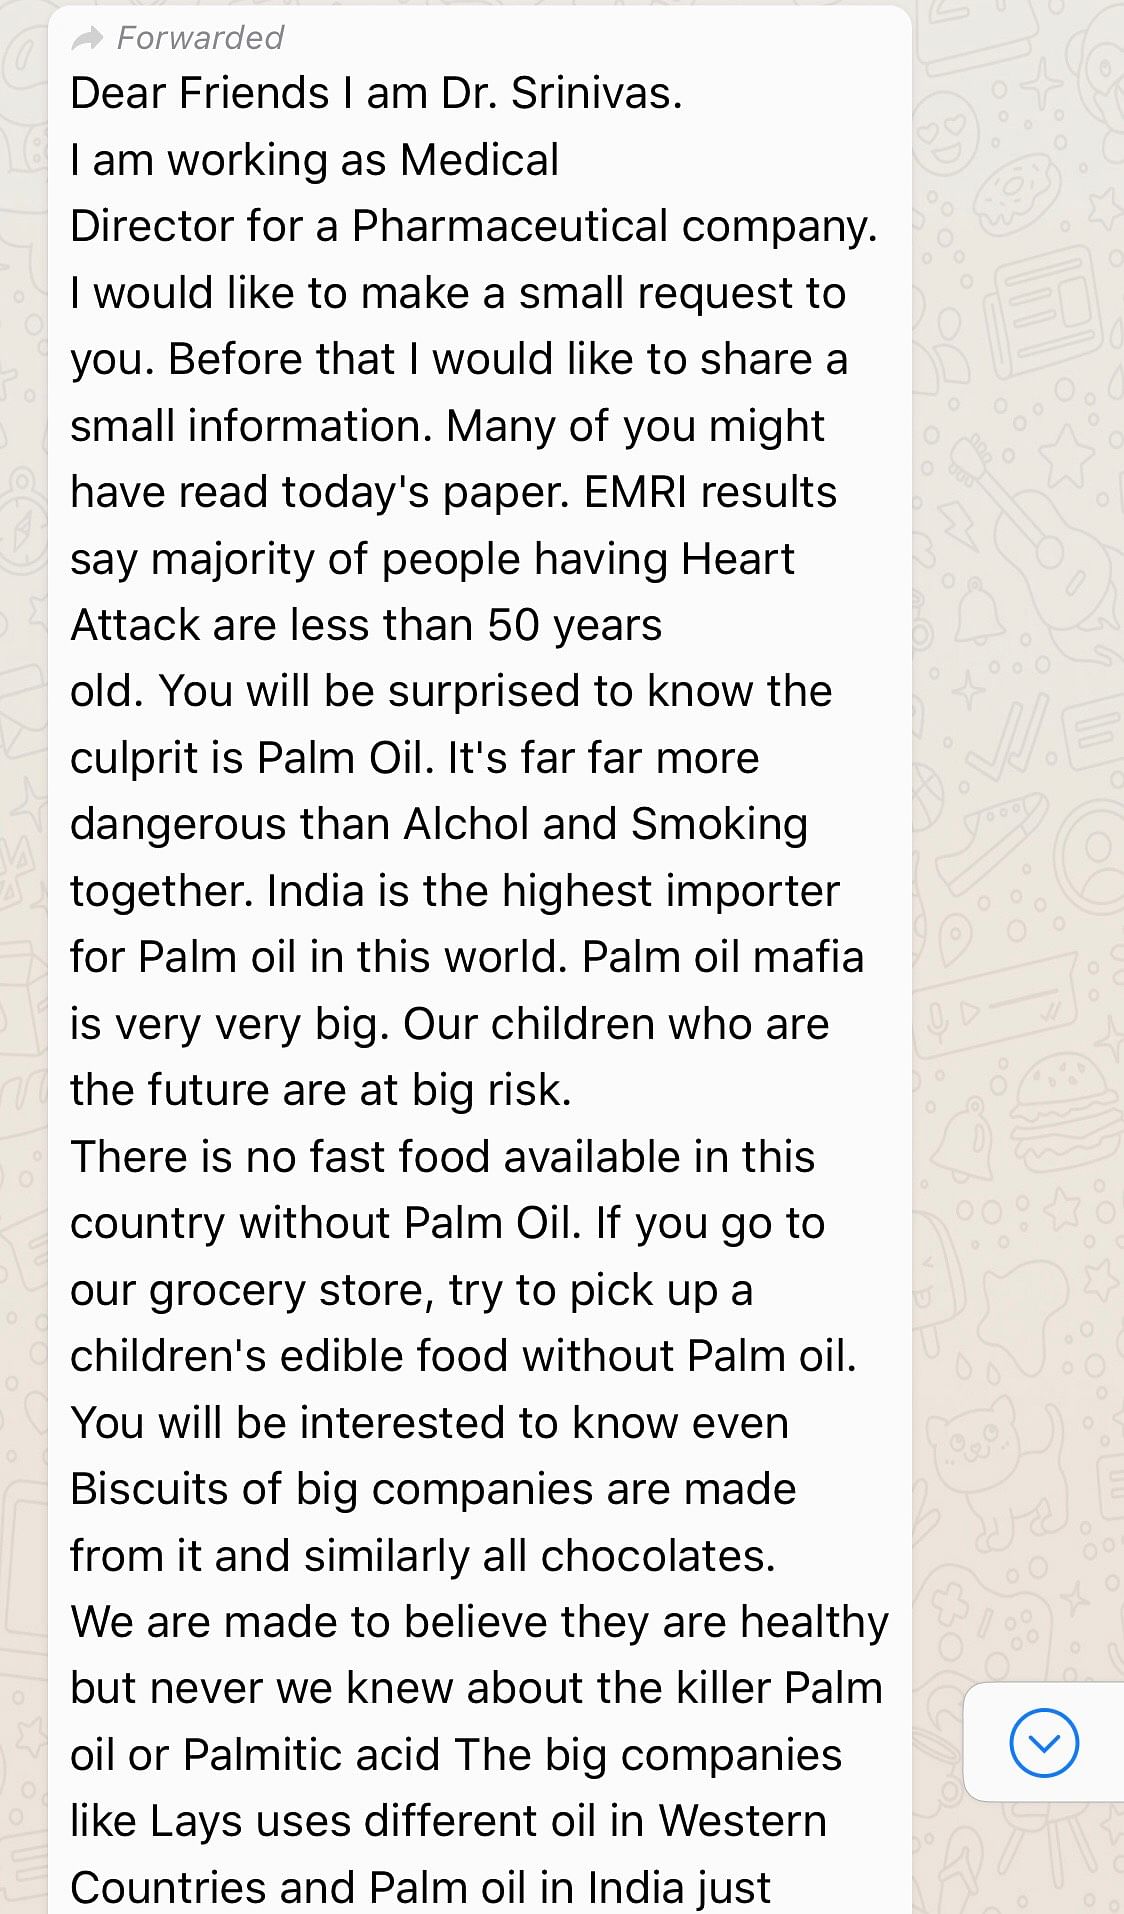 A viral message  claims that palm oil is worse than smoking & alcohol, & is the main culprit behind heart attacks. 